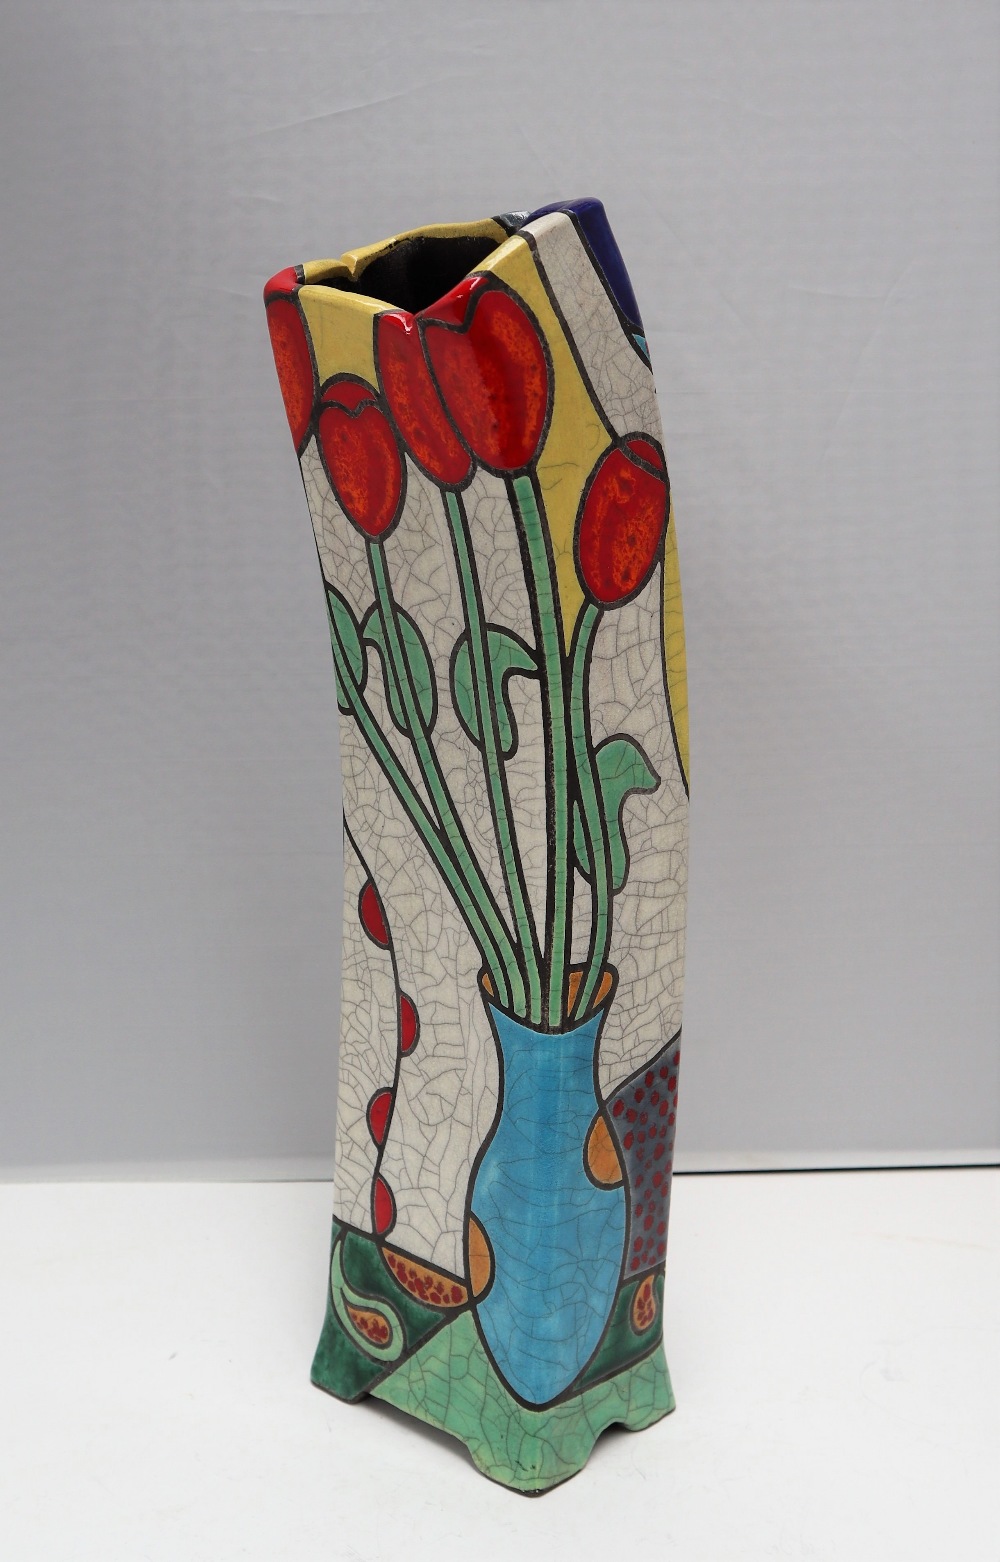 A Tony White leaning raku vase decorated with tulips and a nude figure, titled "Tulips,